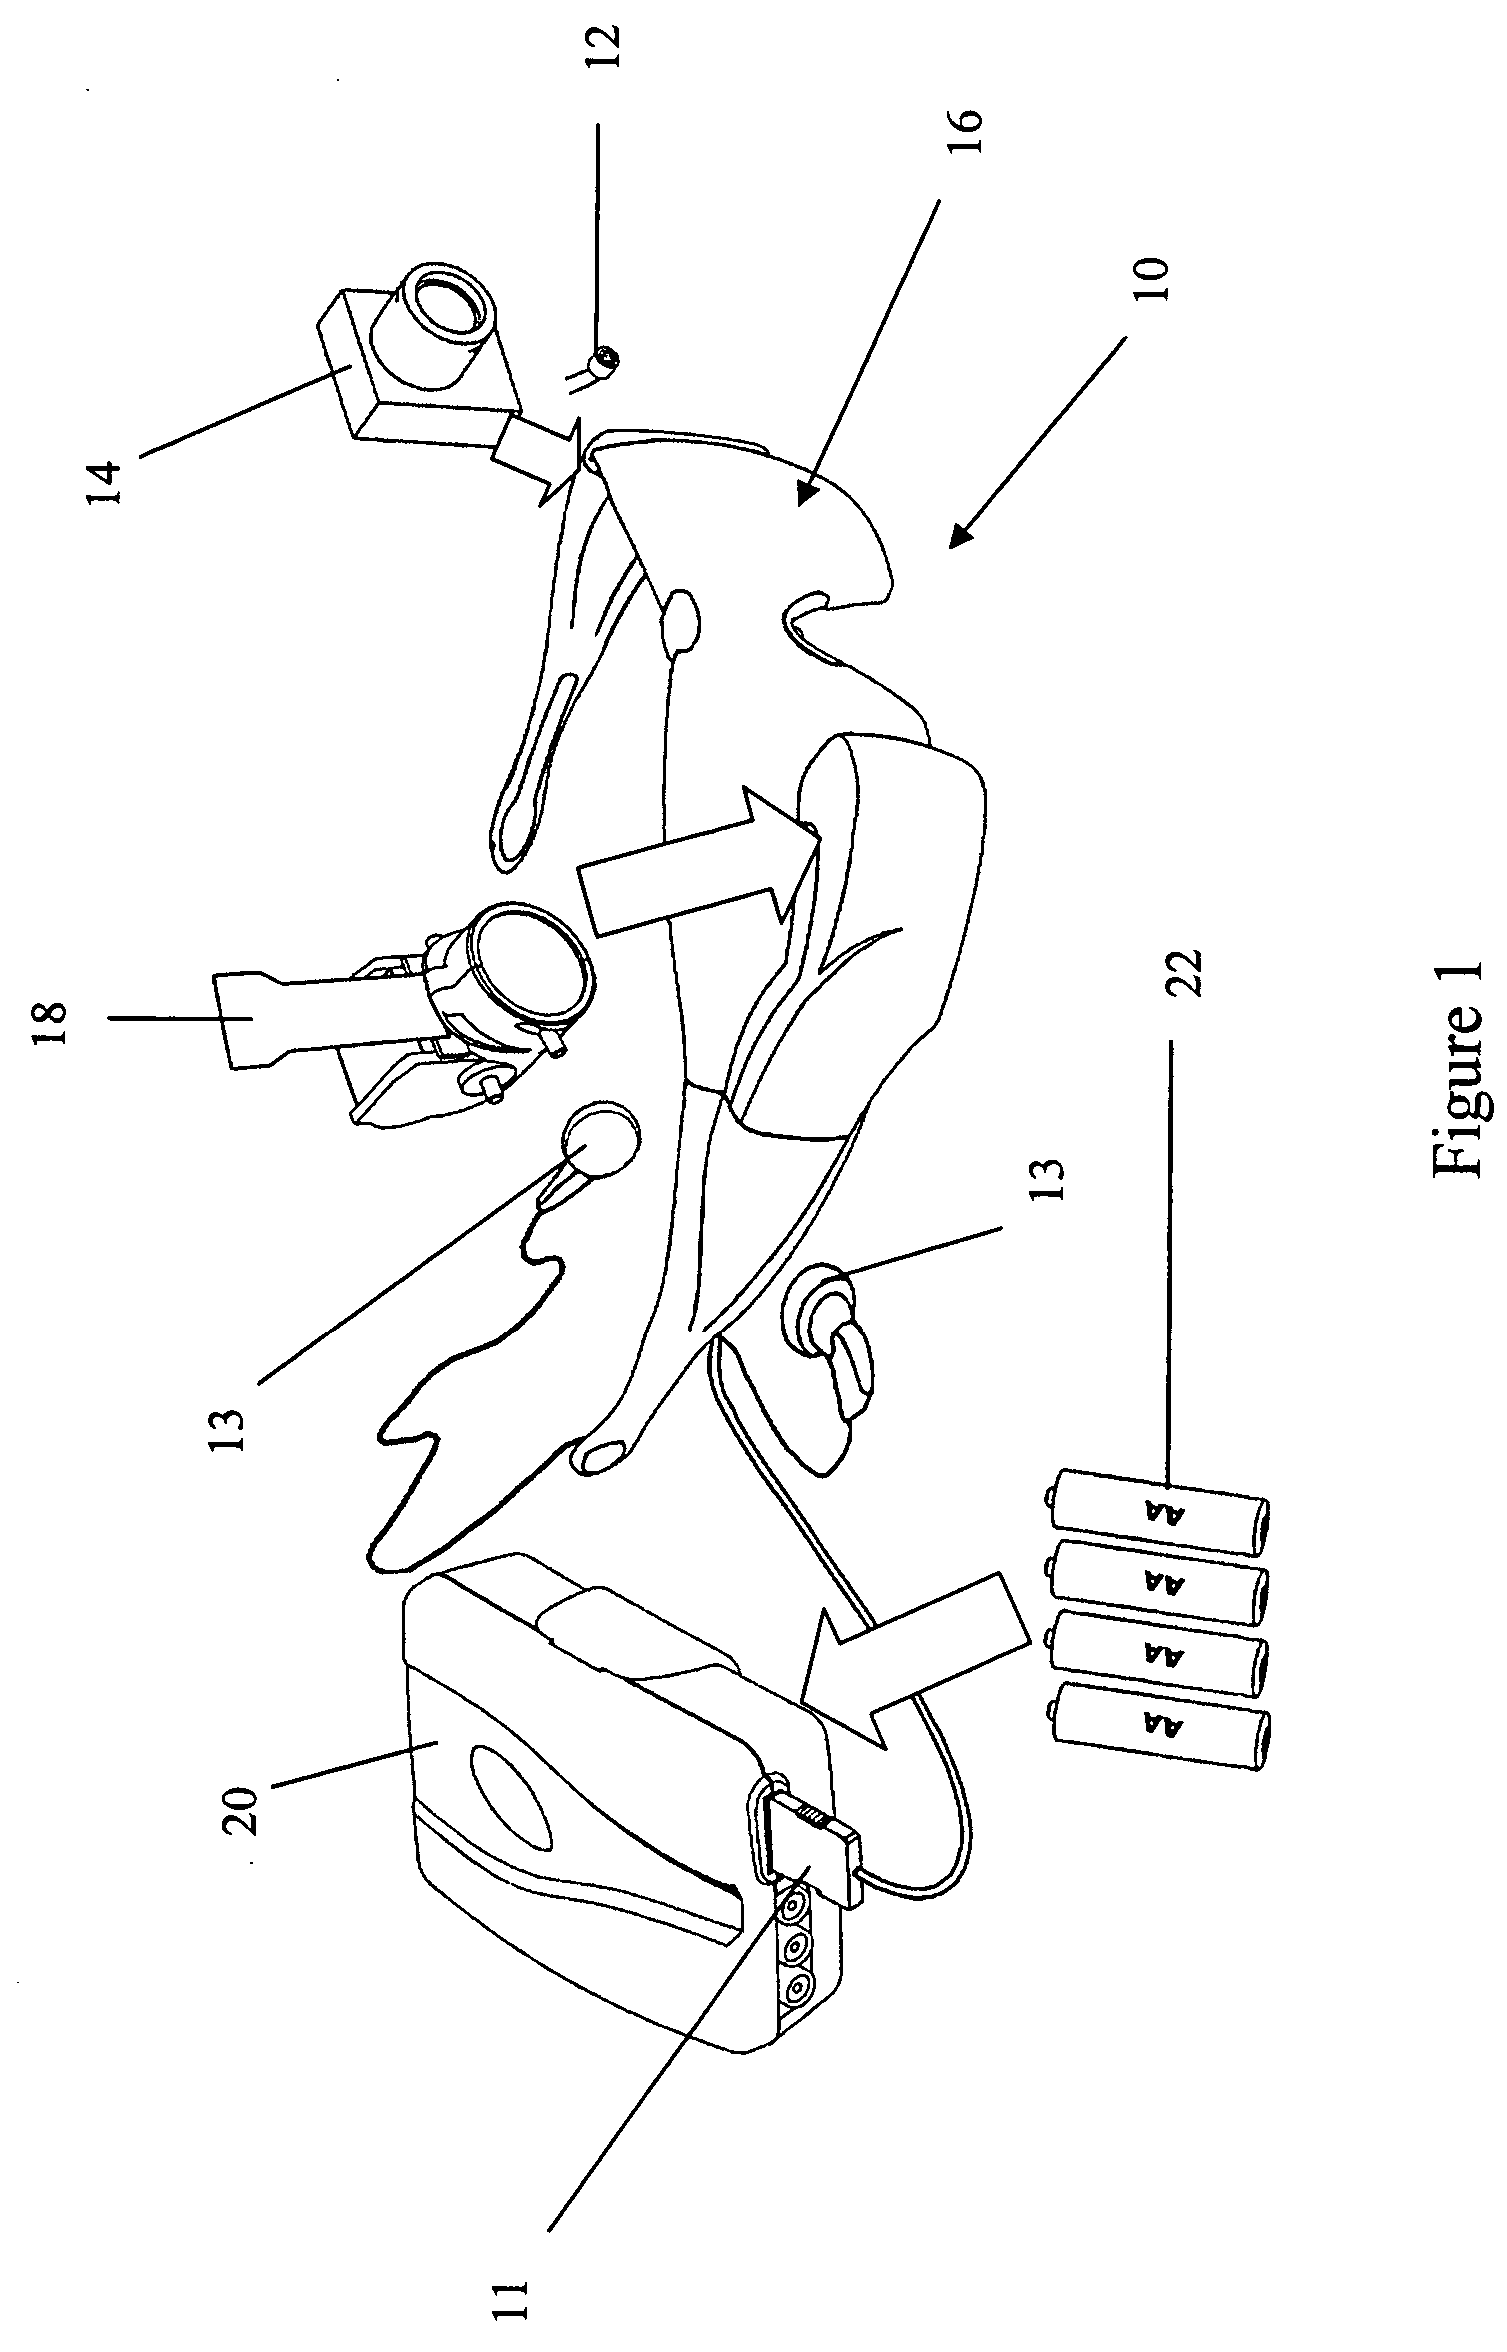 Face-mounted apparatus having spectacles and a video display integrated into the spectacles